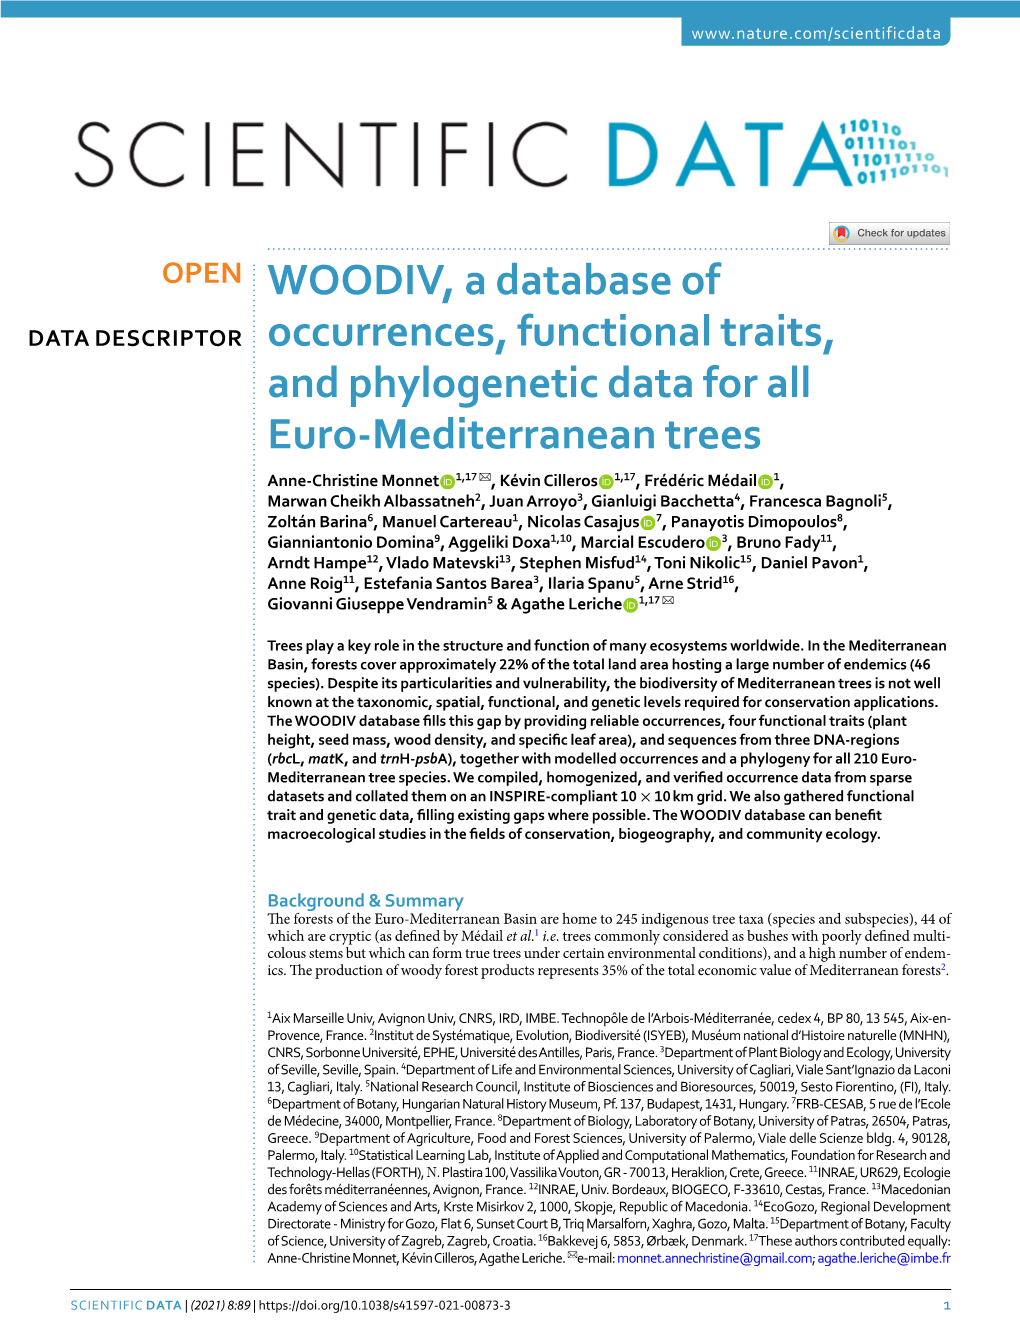 WOODIV, a Database of Occurrences, Functional Traits, and Phylogenetic Data for All Euro-Mediterranean Trees